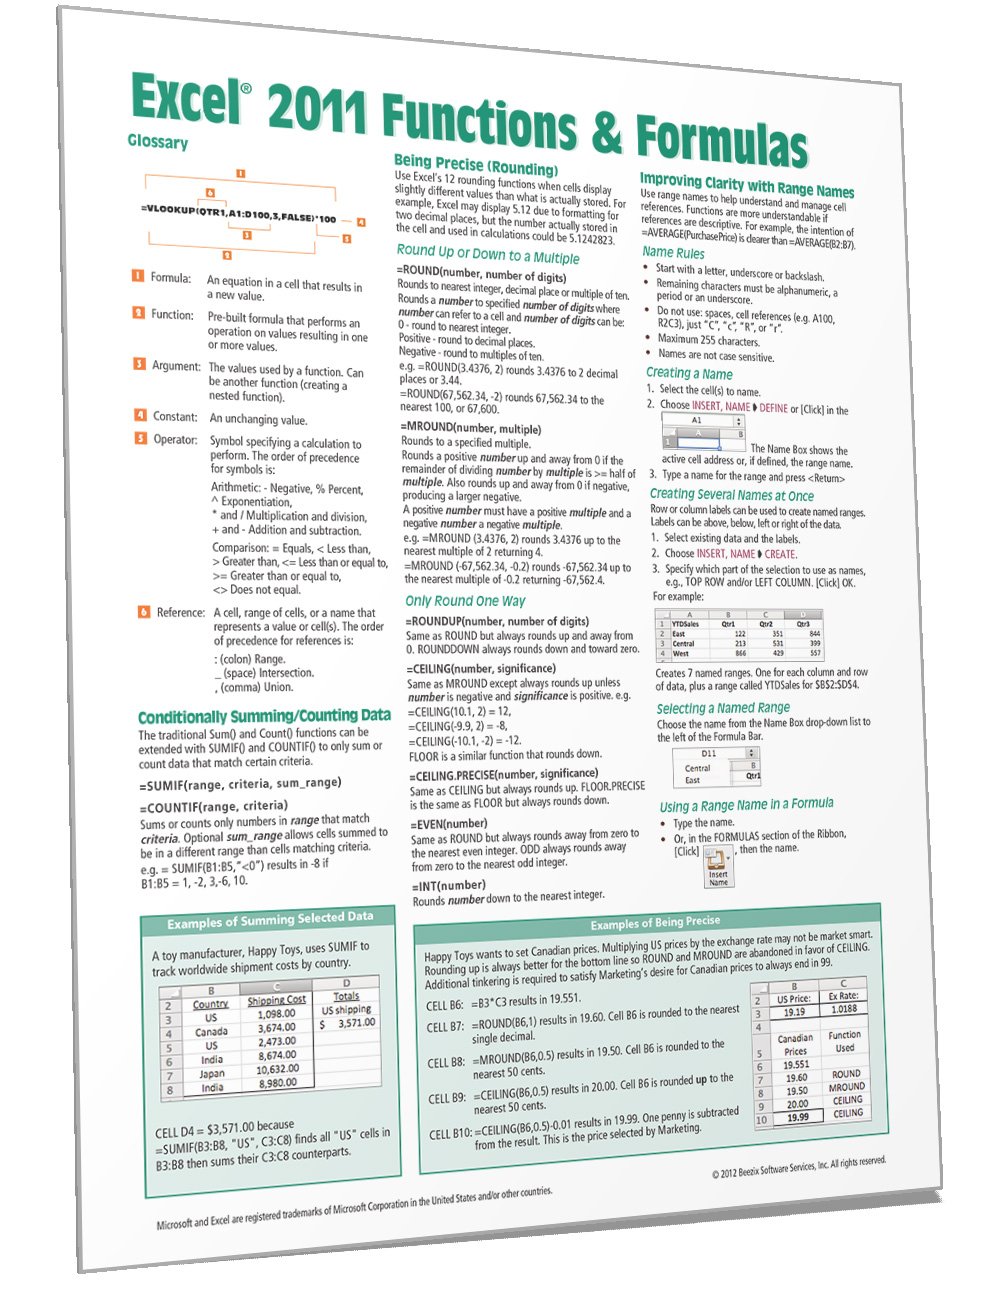 Excel 2011 for Mac: Functions & Formulas Quick Reference Guide (4-page Cheat Sheet focusing on examples and context for intermediate-to-advanced functions and formulas - Laminated Guide)